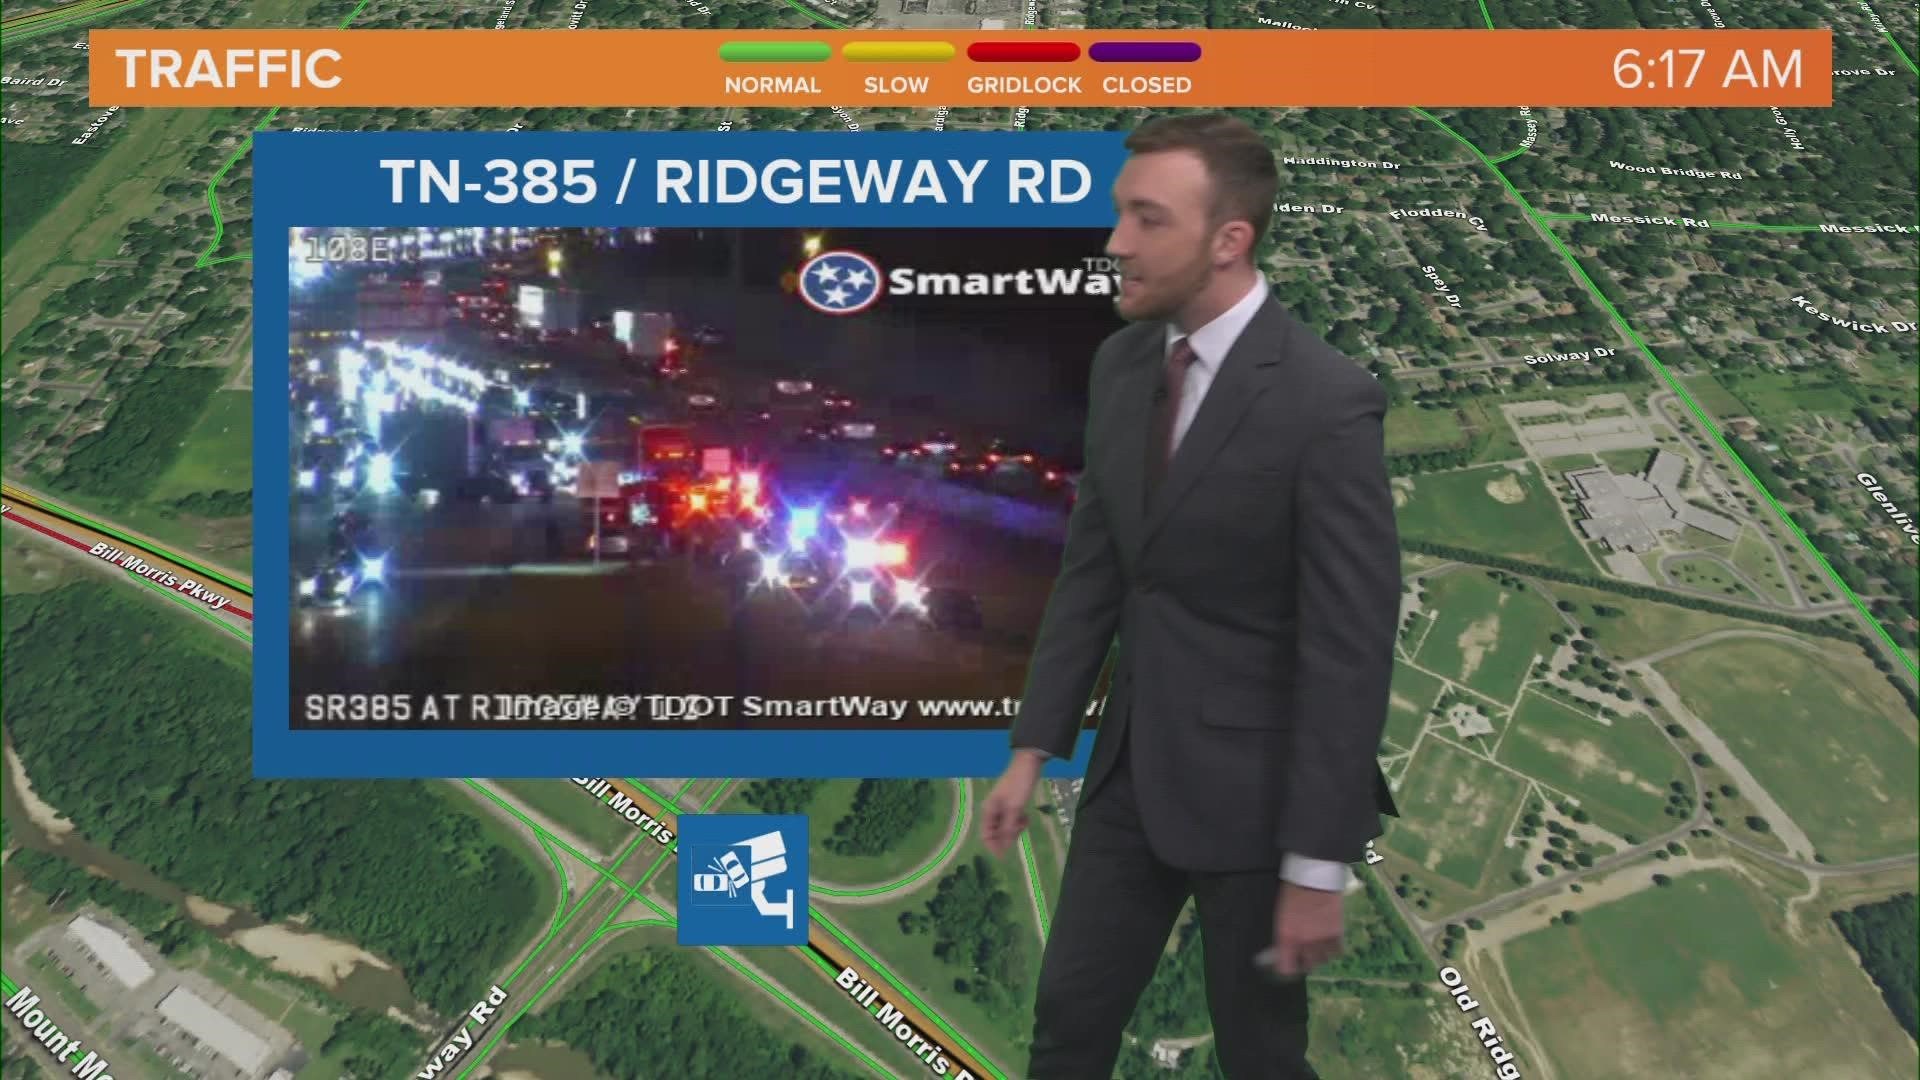 Eastbound lanes on Hwy 385 Bill Morris Pkwy at Ridgeway are now open, but the right shoulder lane is still blocked after a morning accident.